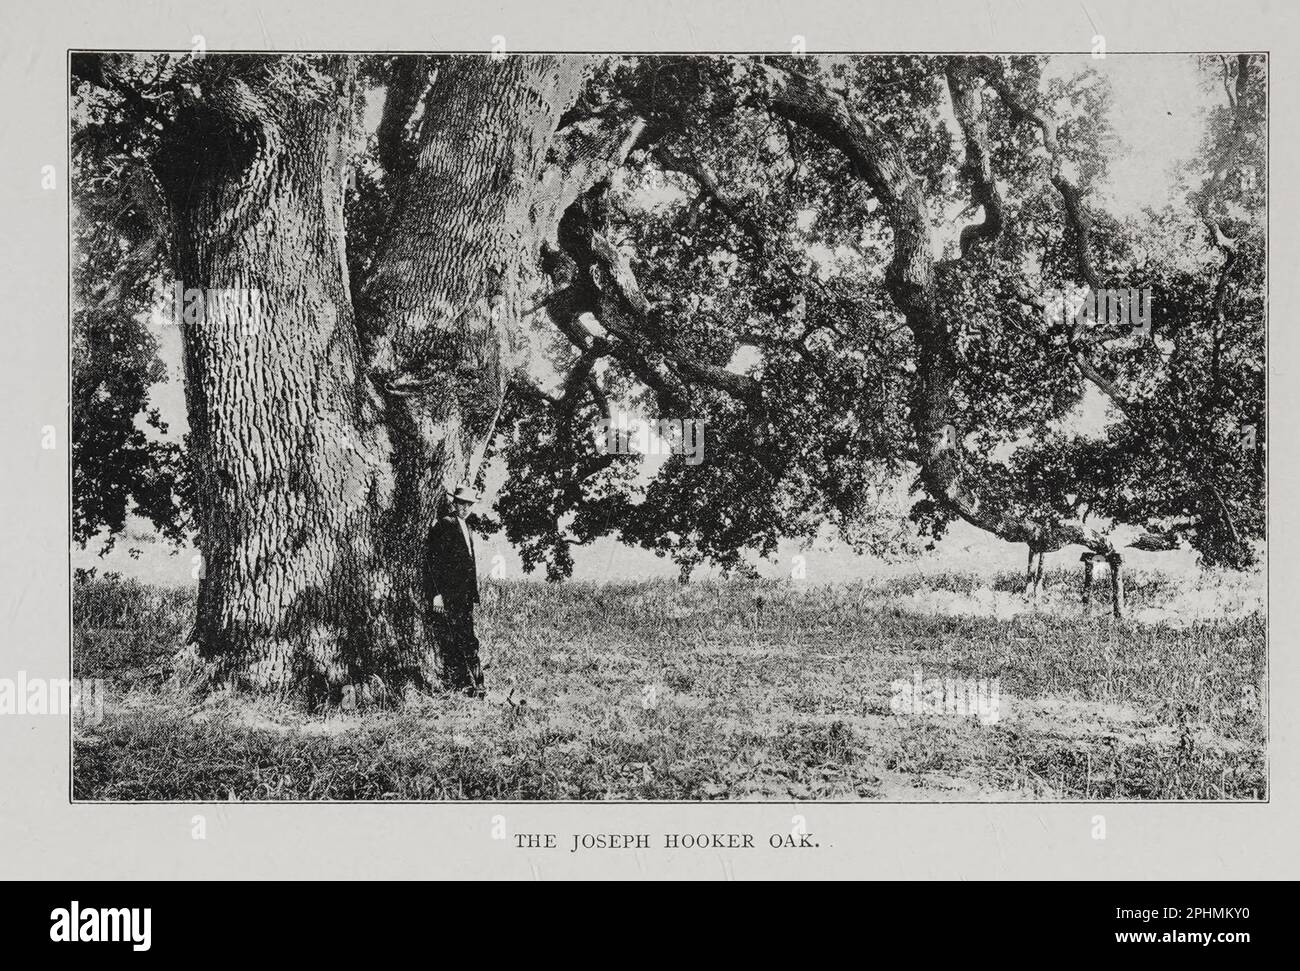 The Joseph Hooker Oak [ Hooker Oak was an extremely large valley oak tree (Quercus lobata) in Chico, California. Amateur botanist and local socialite Annie Bidwell, whose husband had founded Chico, named the tree in 1887 after English botanist and Director of the Royal Botanical Gardens Sir Joseph Dalton Hooker. It was featured in the 1938 film The Adventures of Robin Hood starring Errol Flynn. The tree fell in 1977 and portions of the wood was later milled for use by local artisans. ] from the book ' california, romantic and beautiful ' by George Wharton James Publication date 1914 Publisher Stock Photo